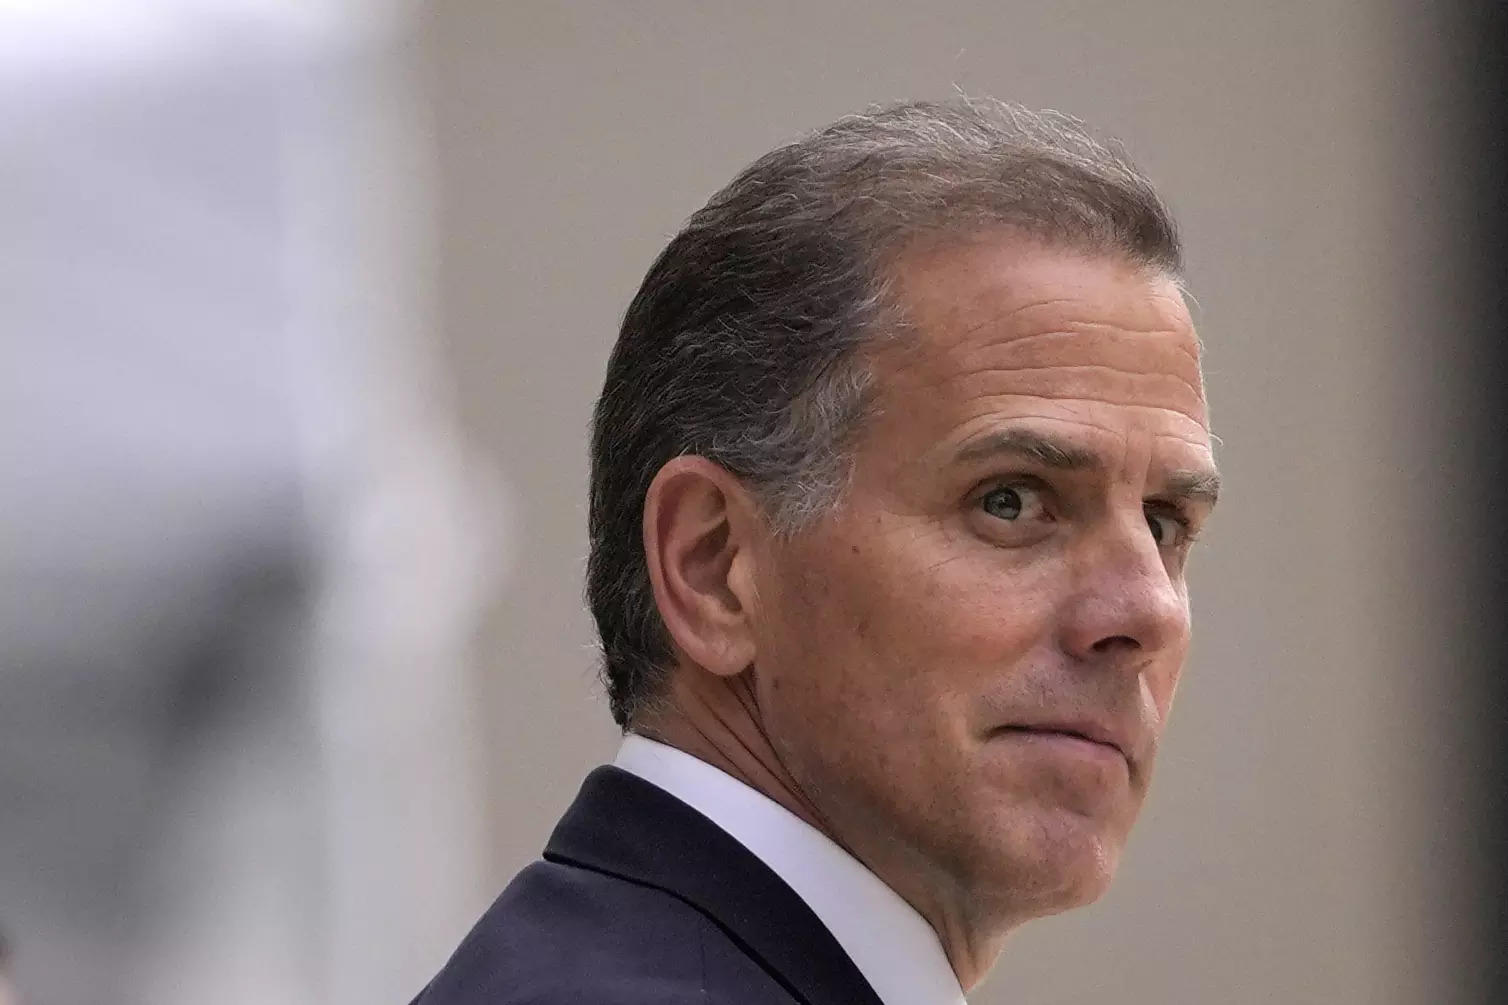 Hunter Biden told lover he was a ‘drunk and an addict’